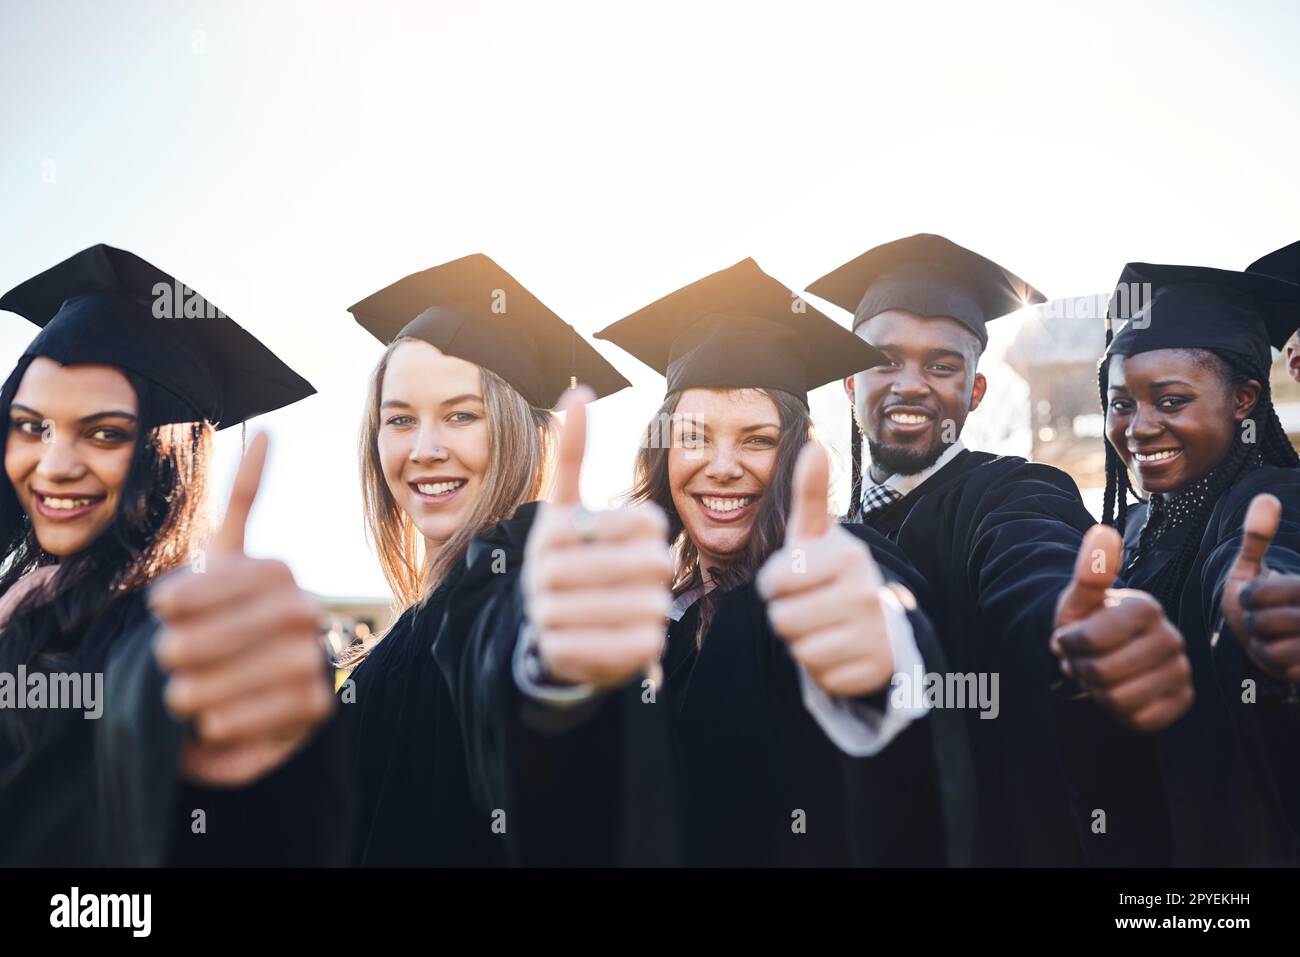 1. Your time as a caterpillar has expired. Your wings are ready.Portrait of a group of students showing thumbs up on graduation day. Stock Photo